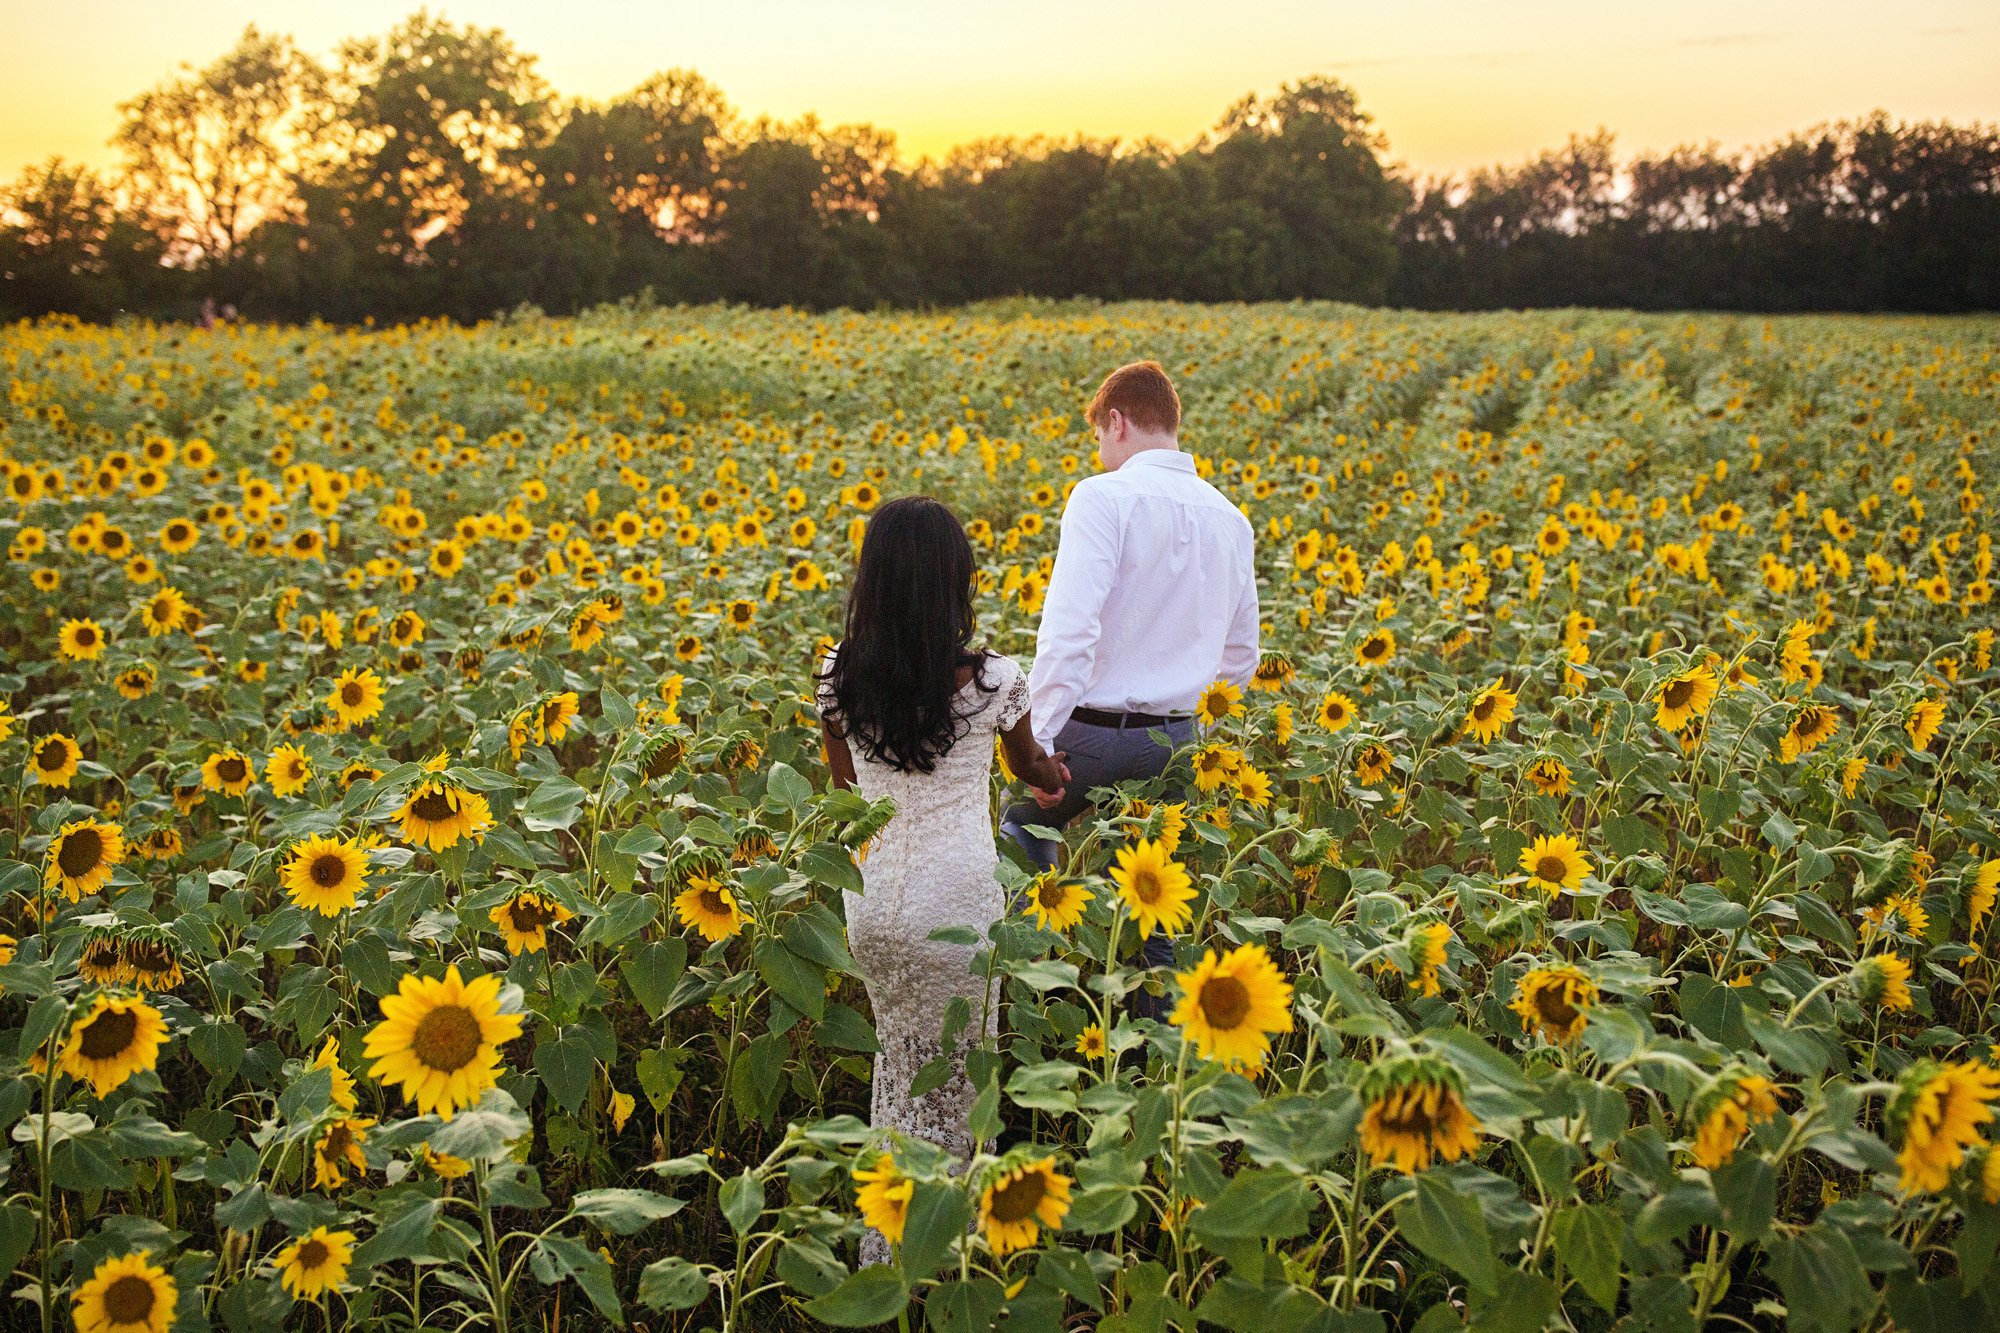 Seriously_Sabrina_Photography_Lexington_Midway_Kentucky_Engagement_Merefield_Sunflowers_Naz_and_Drew36.jpg